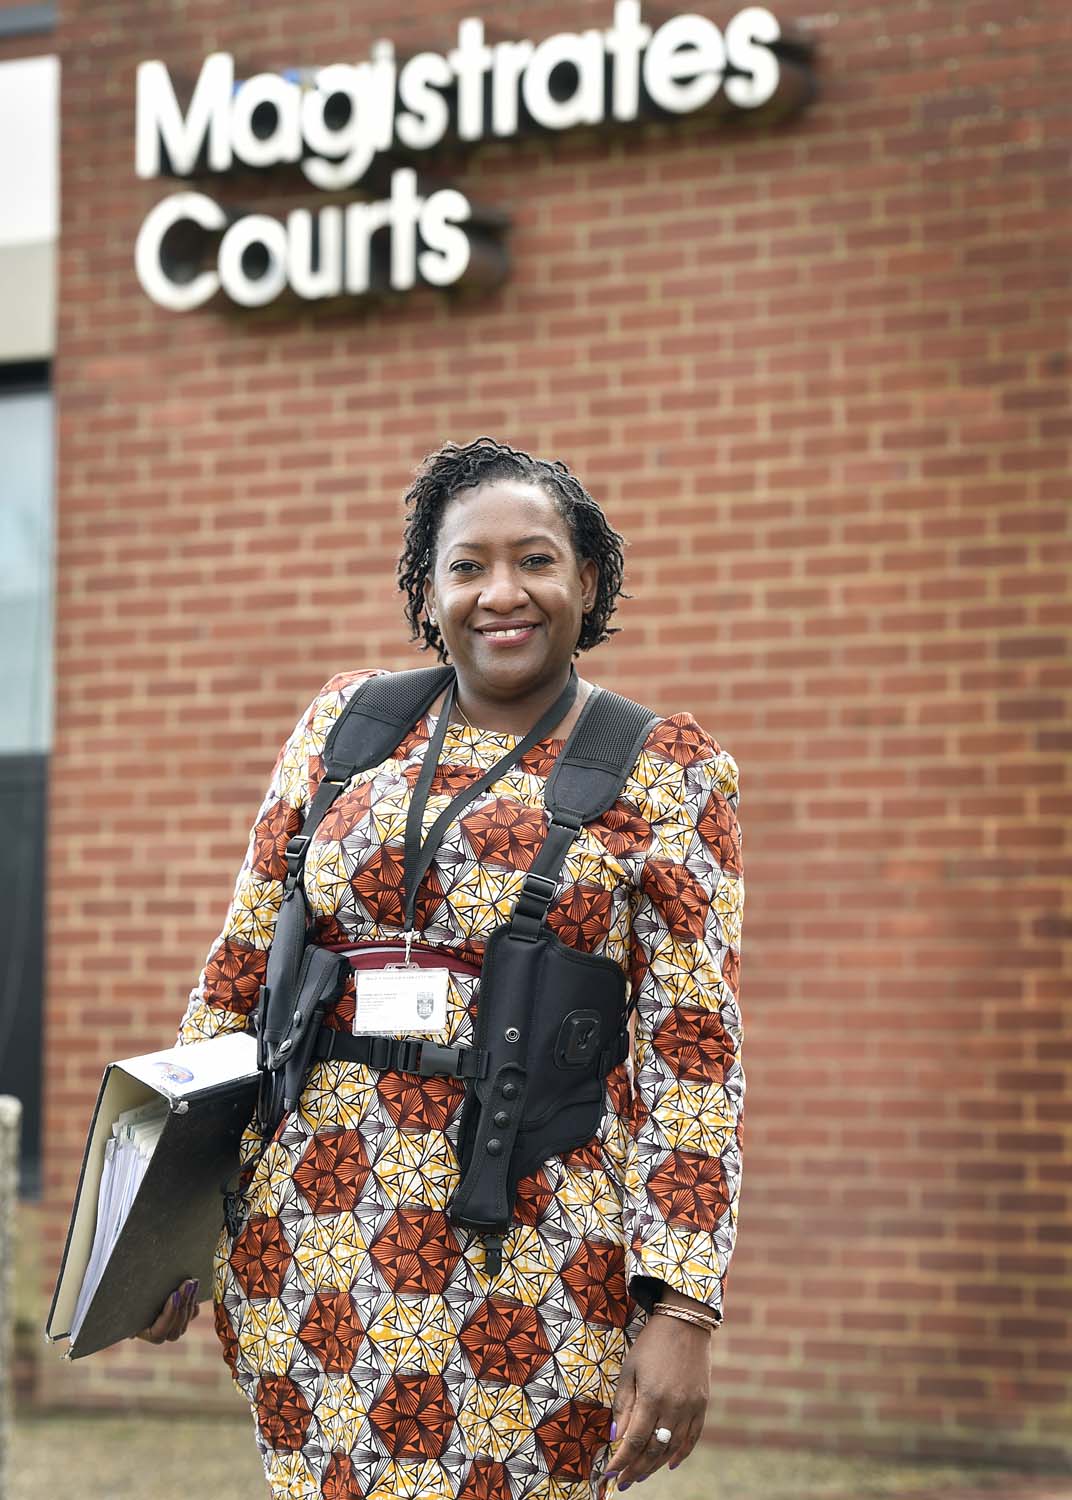 Detective Constable Yvonne Newman stands outside Magistrates Court, holding a folder and wearing a Thames Valley Police ID, and proudly wearing her Zimbawean African traditional clothing.